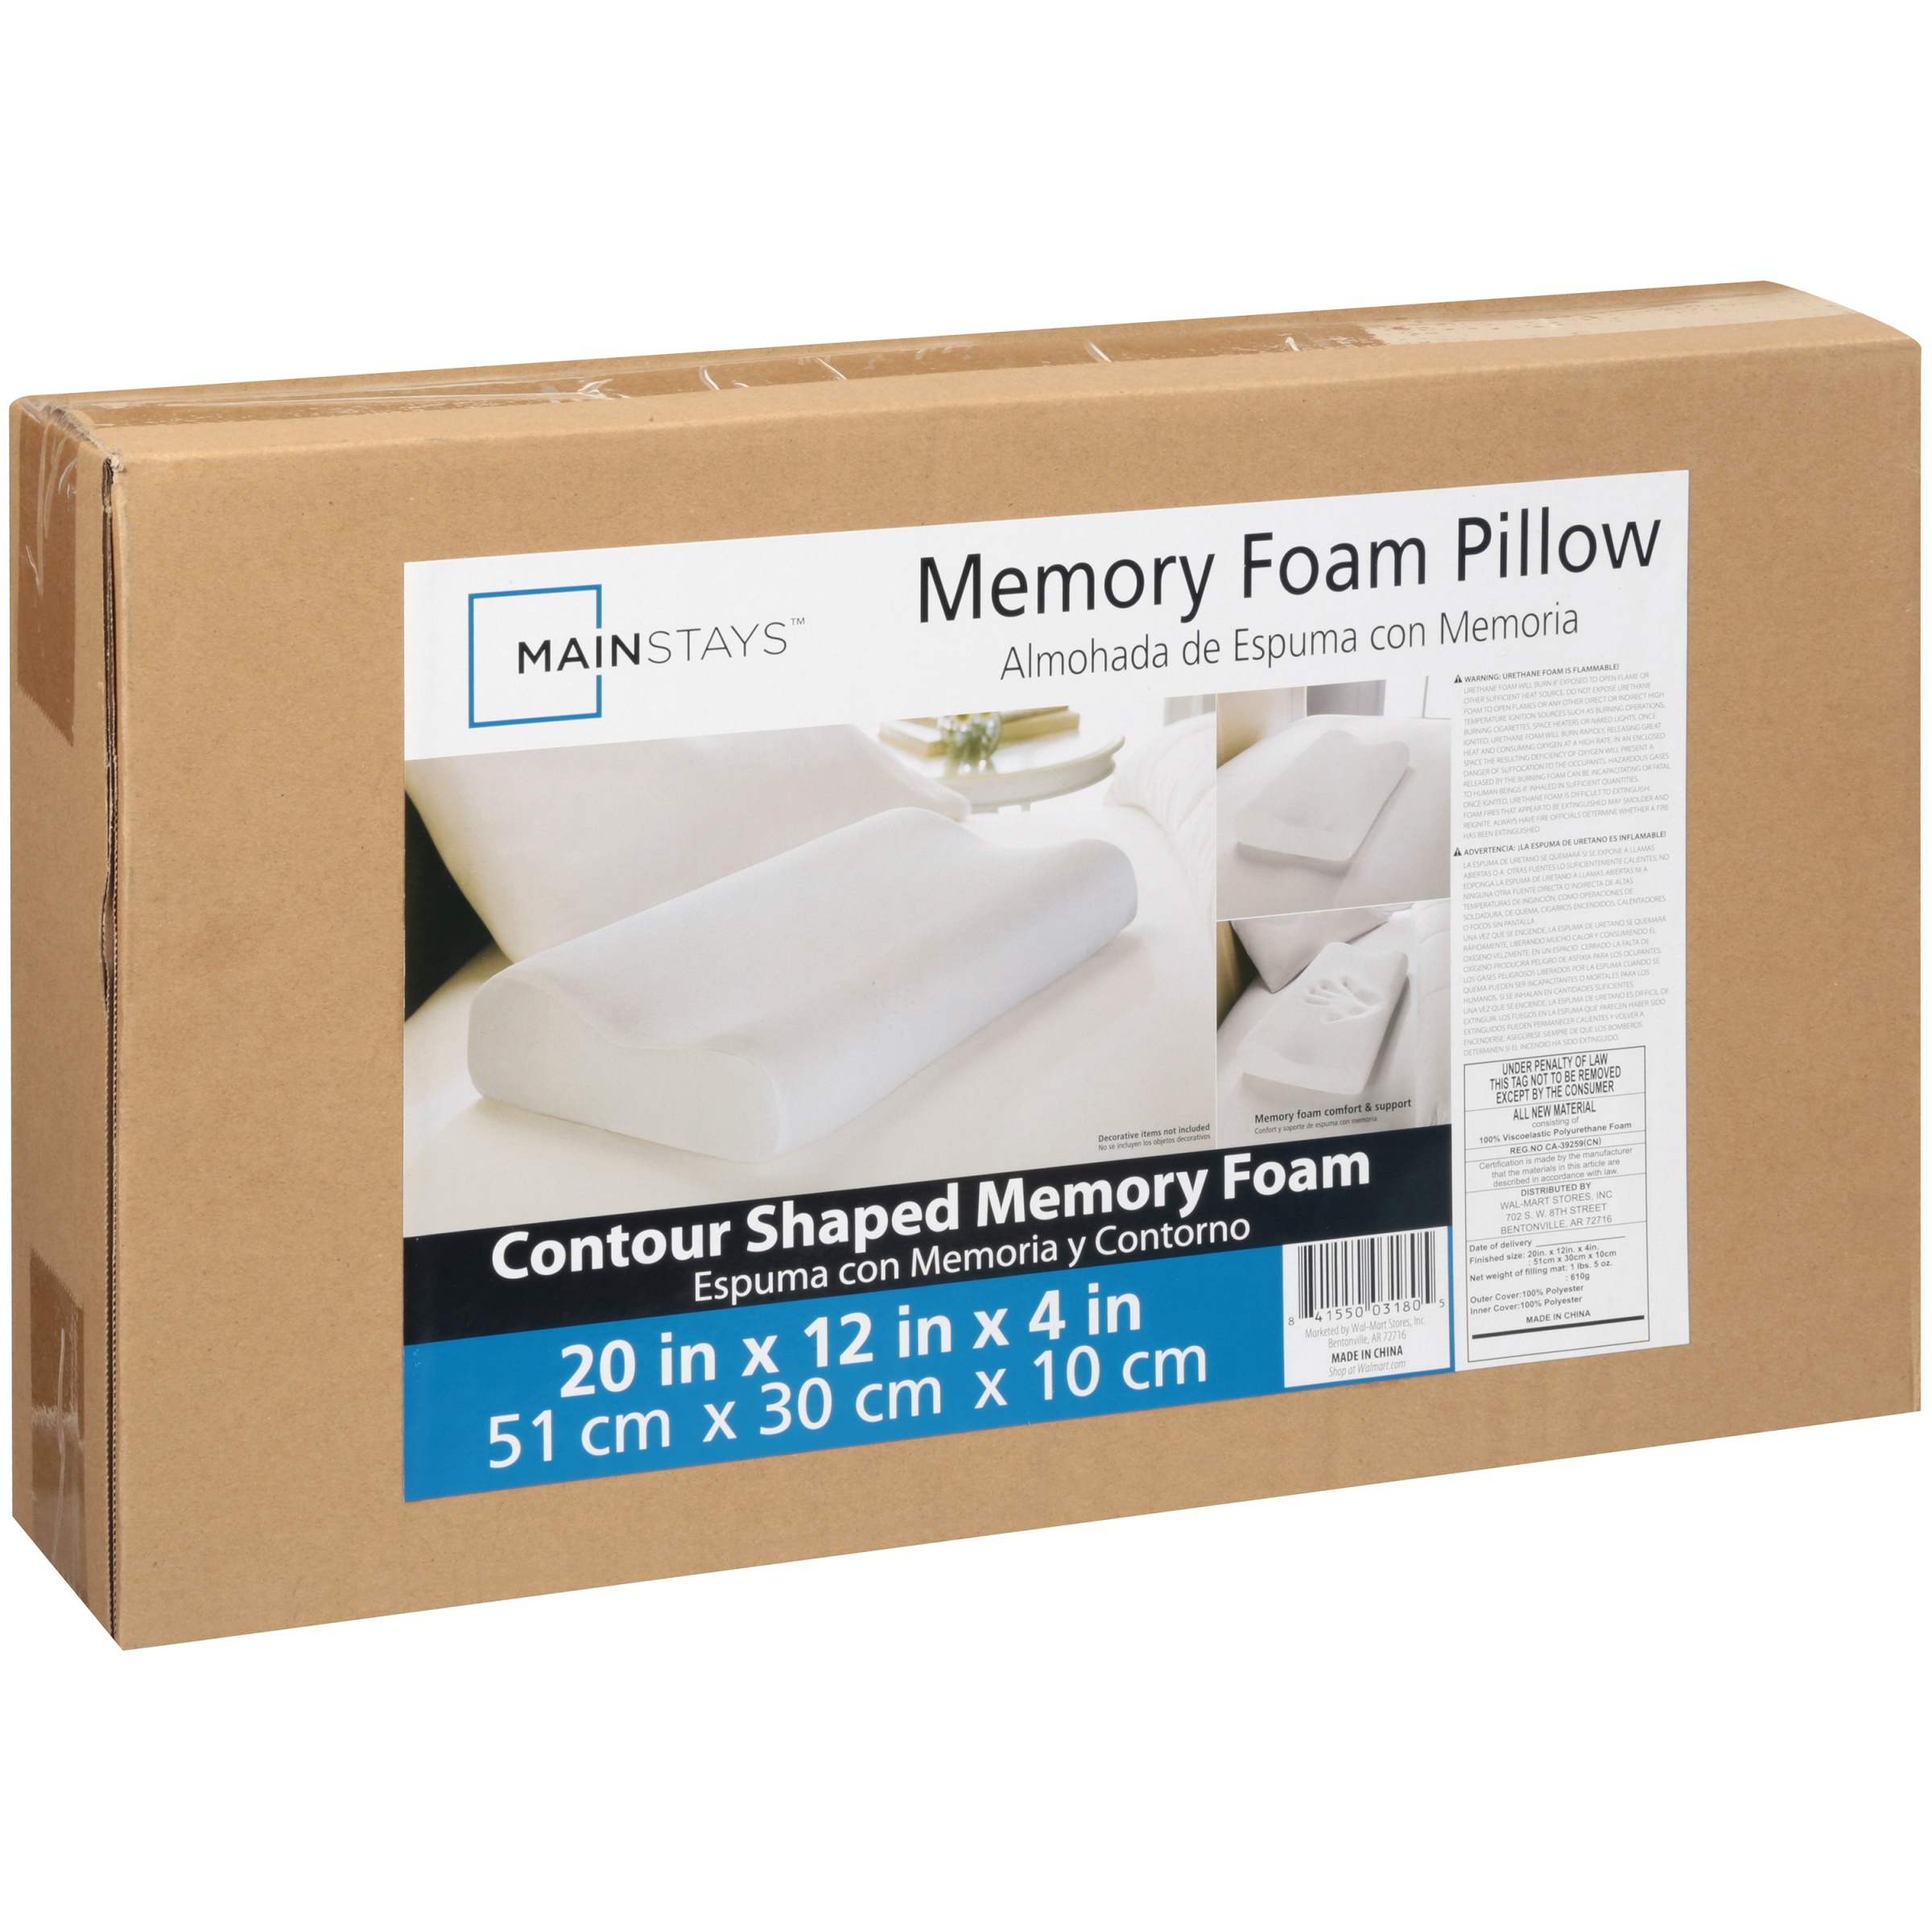 Mainstays Memory Foam Contour Pillow, Green Tea Extracts for Odor Control - image 2 of 3